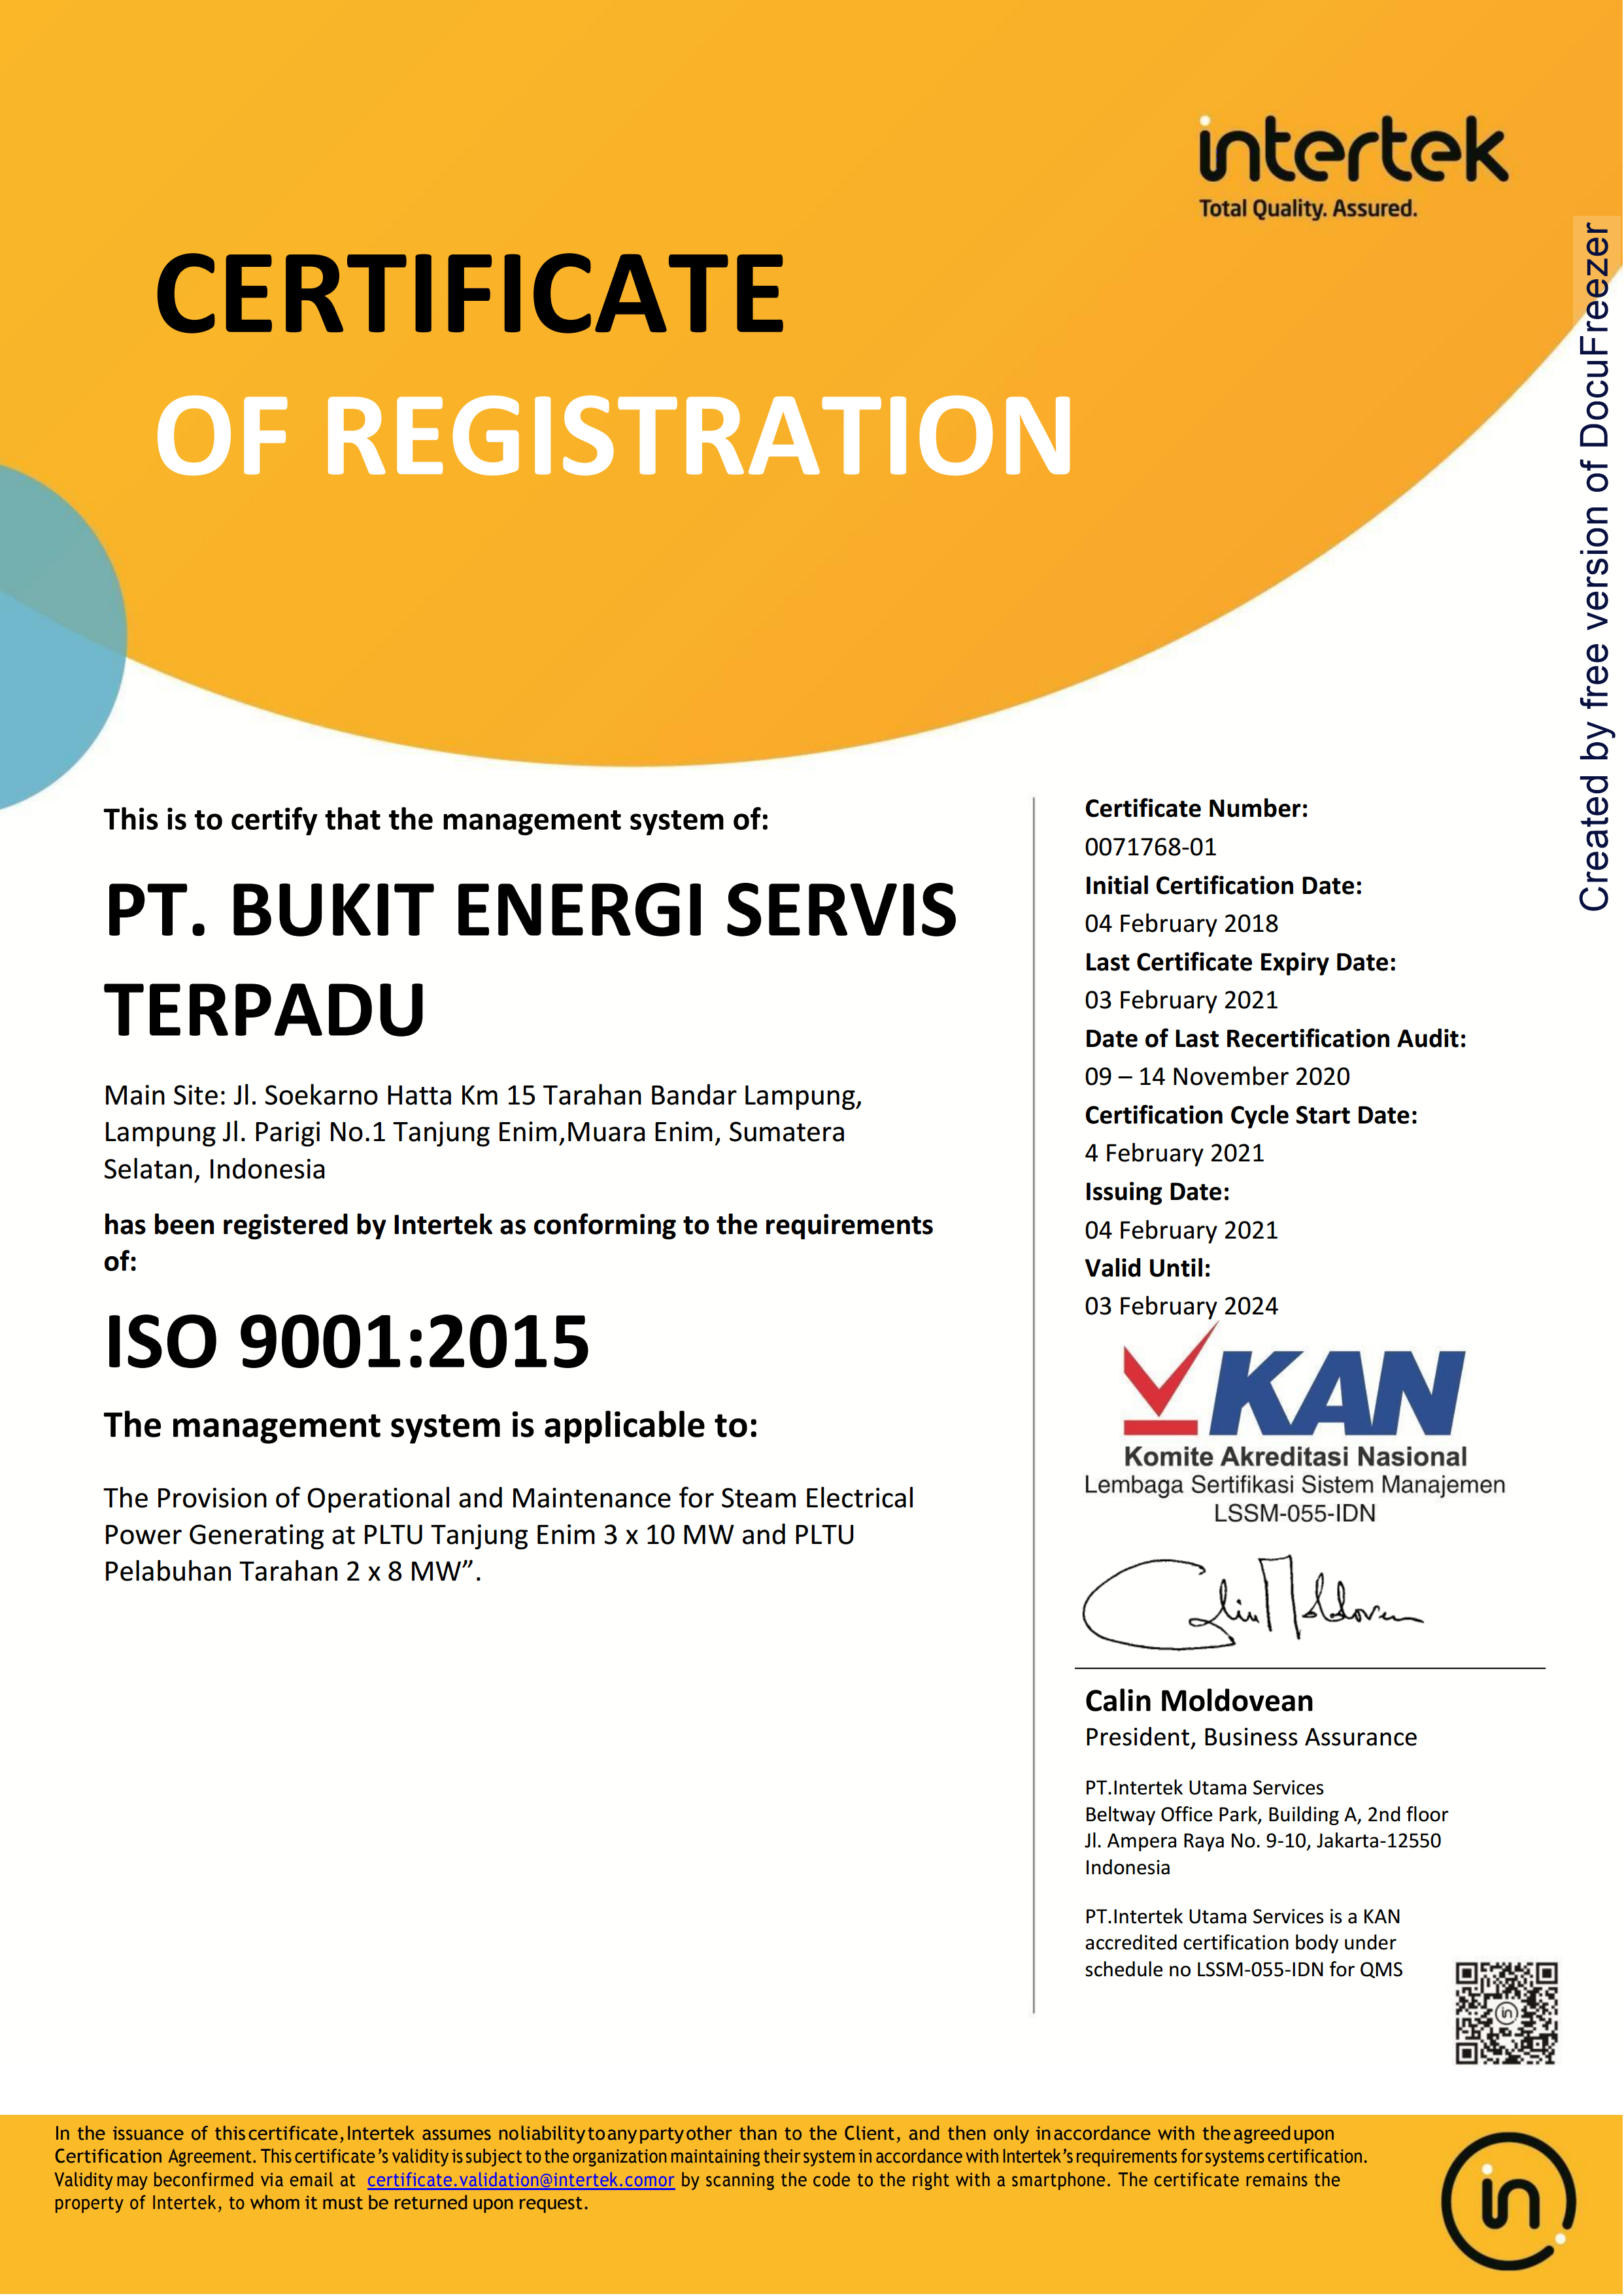 ISO 9001 Certificate; 2015